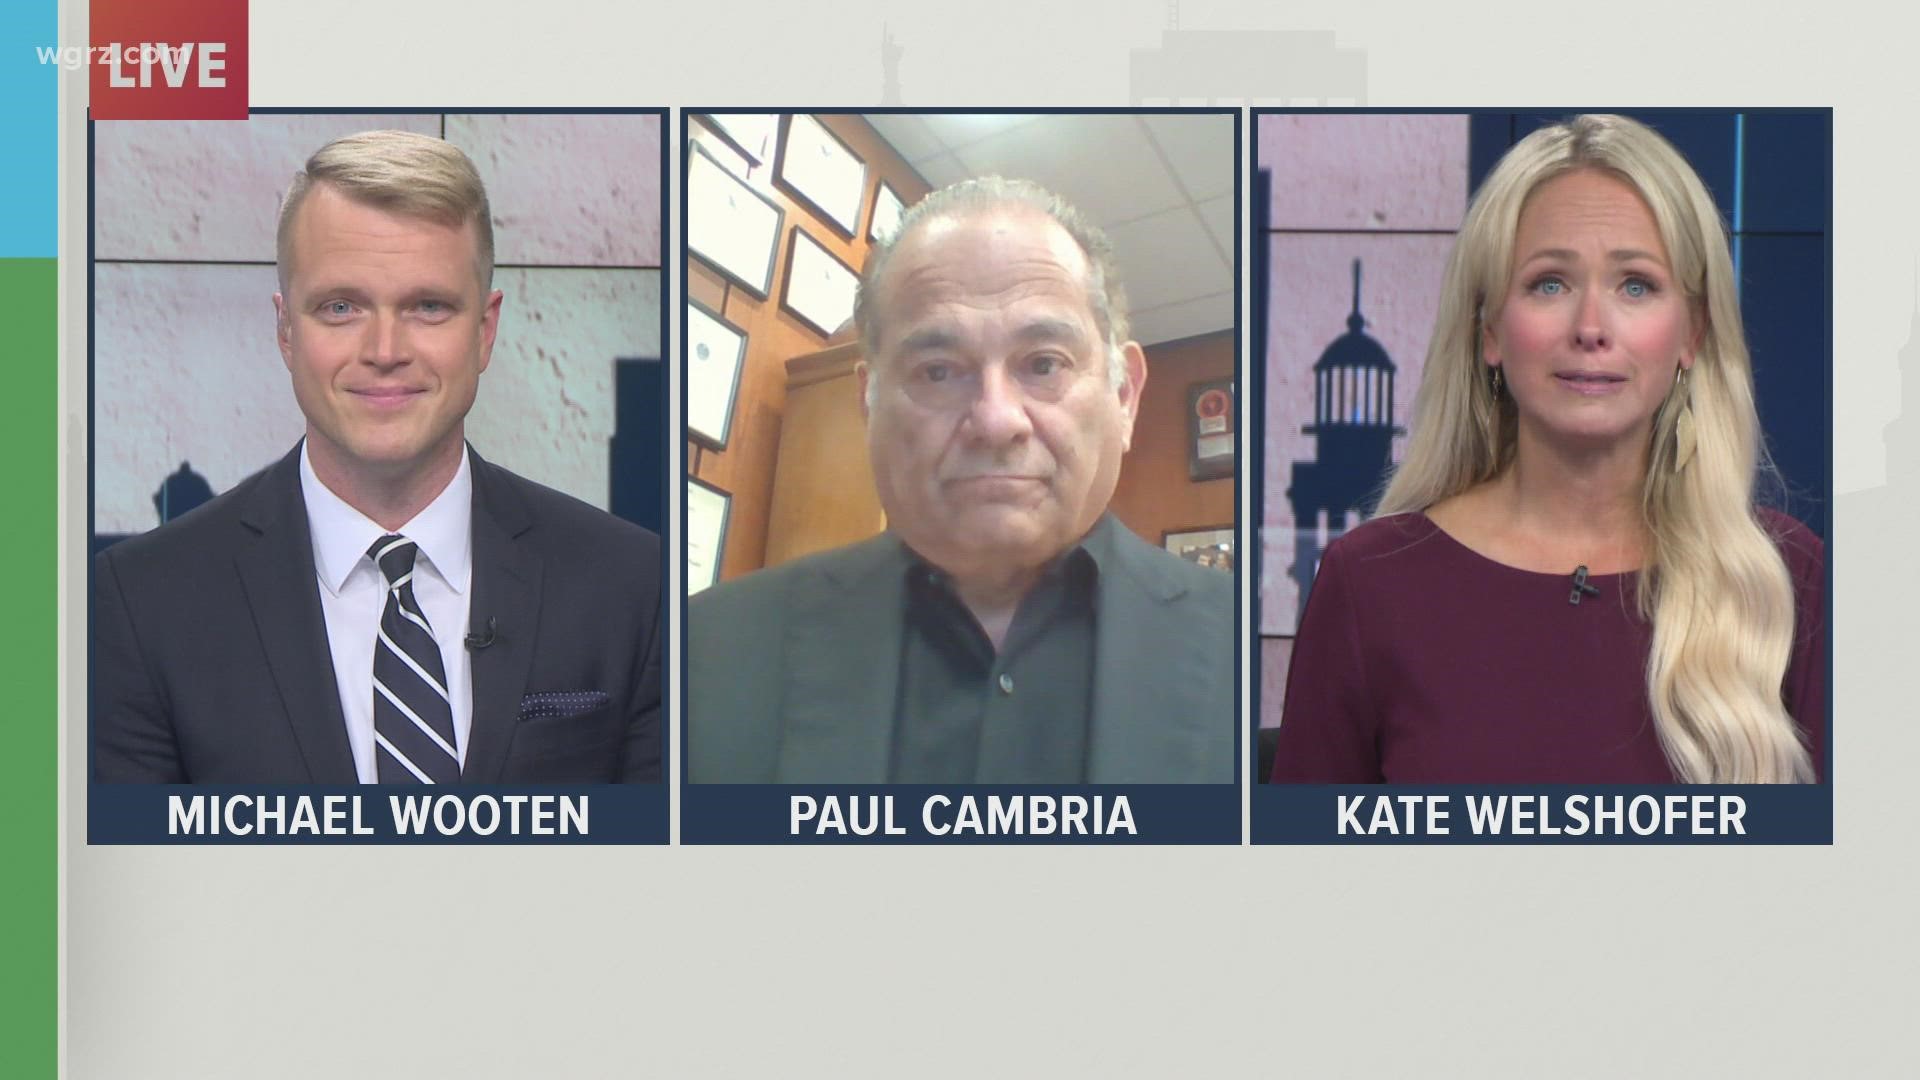 Paul Cambria, a constitutional expert, joined our Town Hall to discuss comments made by an Olean middle school principal, who is also a preacher.